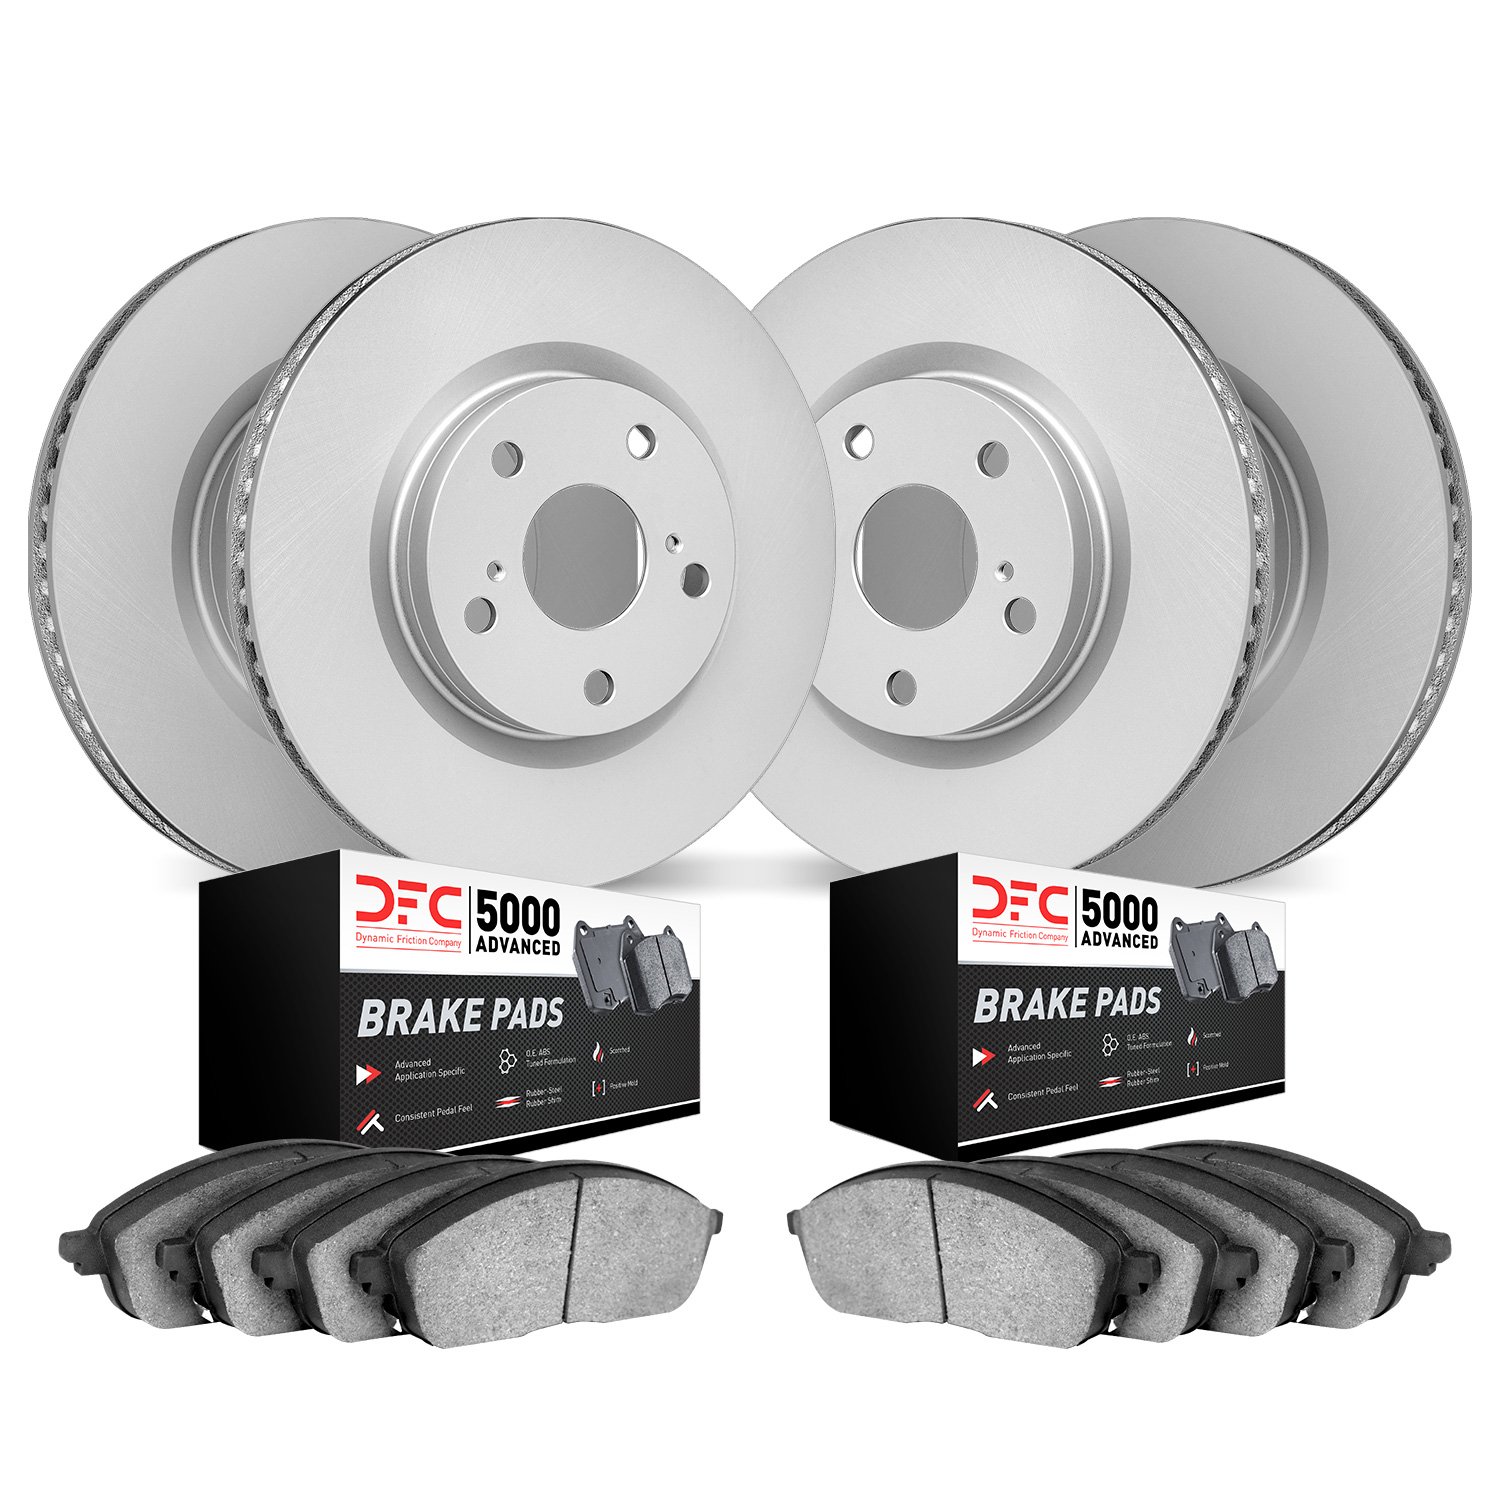 4504-54293 Geospec Brake Rotors w/5000 Advanced Brake Pads Kit, Fits Select Ford/Lincoln/Mercury/Mazda, Position: Front and Rear